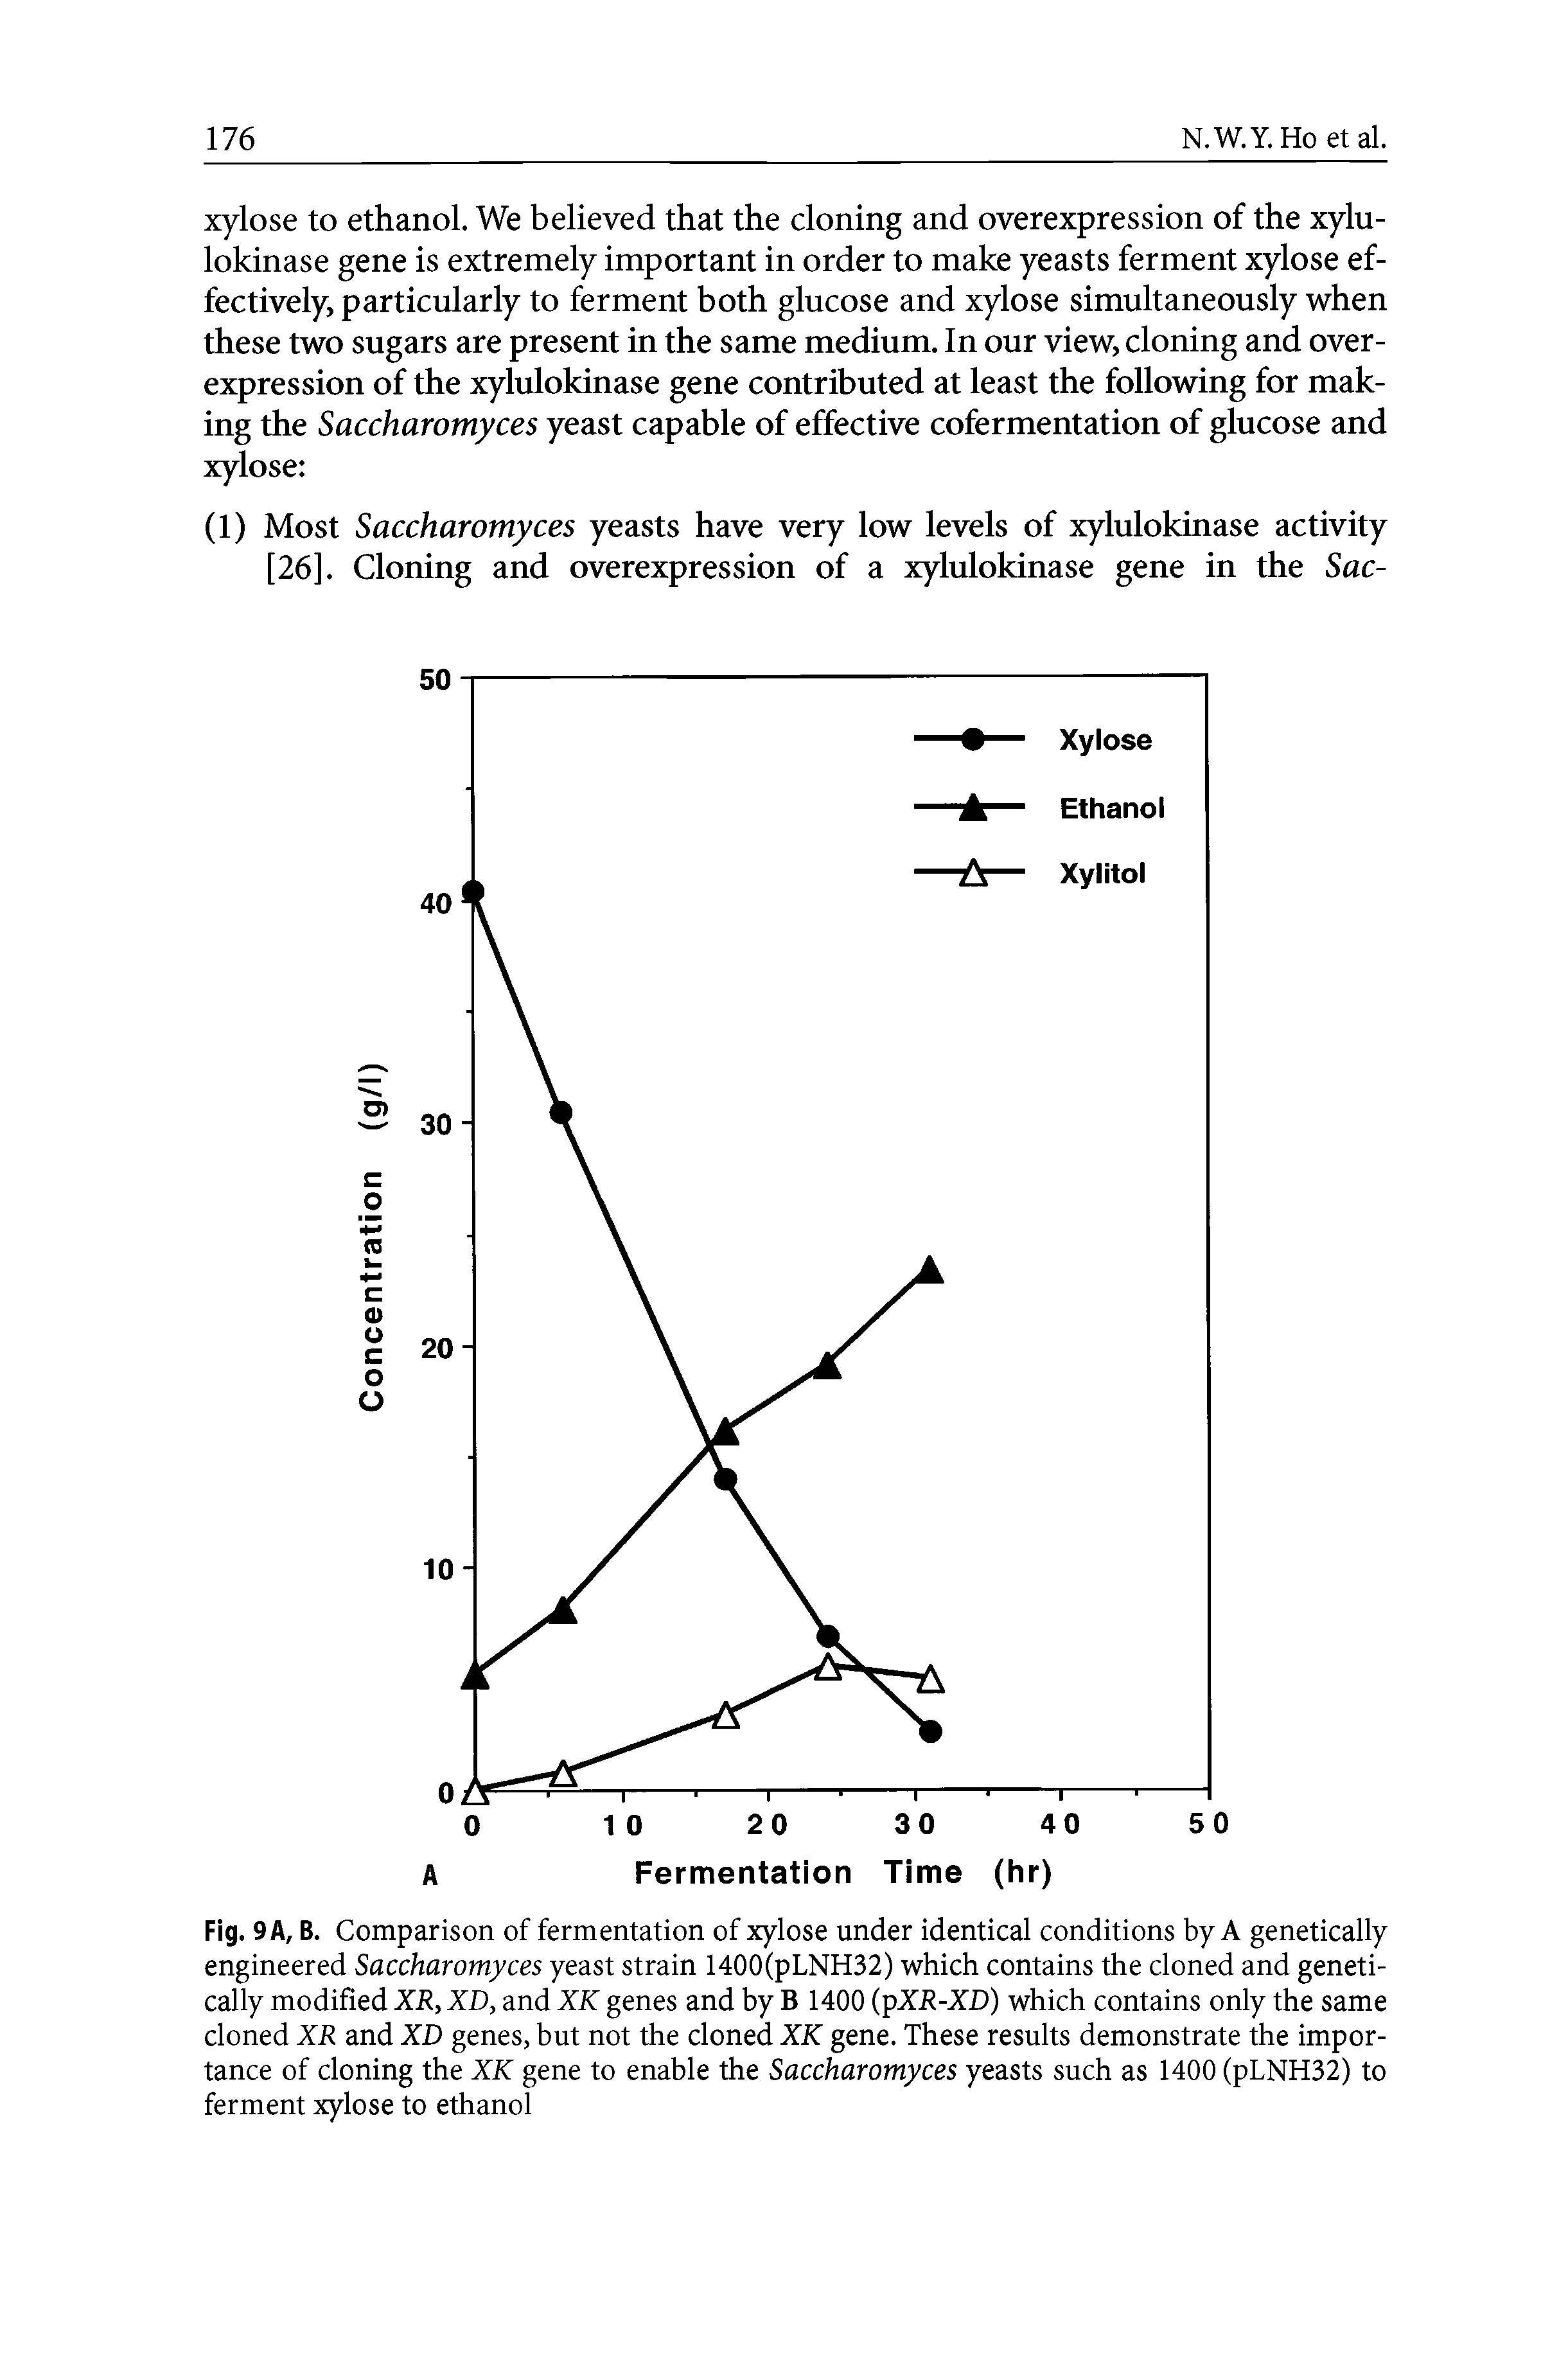 Fig. 9 A, B. Comparison of fermentation of xylose under identical conditions by A genetically engineered Saccharomyces yeast strain 1400(pLNH32) which contains the cloned and genetically modified XR, XD, and XK genes and by B 1400 (pXR-XD) which contains only the same cloned XR and XD genes, but not the cloned XK gene. These results demonstrate the importance of cloning the XK gene to enable the Saccharomyces yeasts such as 1400 (pLNH32) to ferment xylose to ethanol...